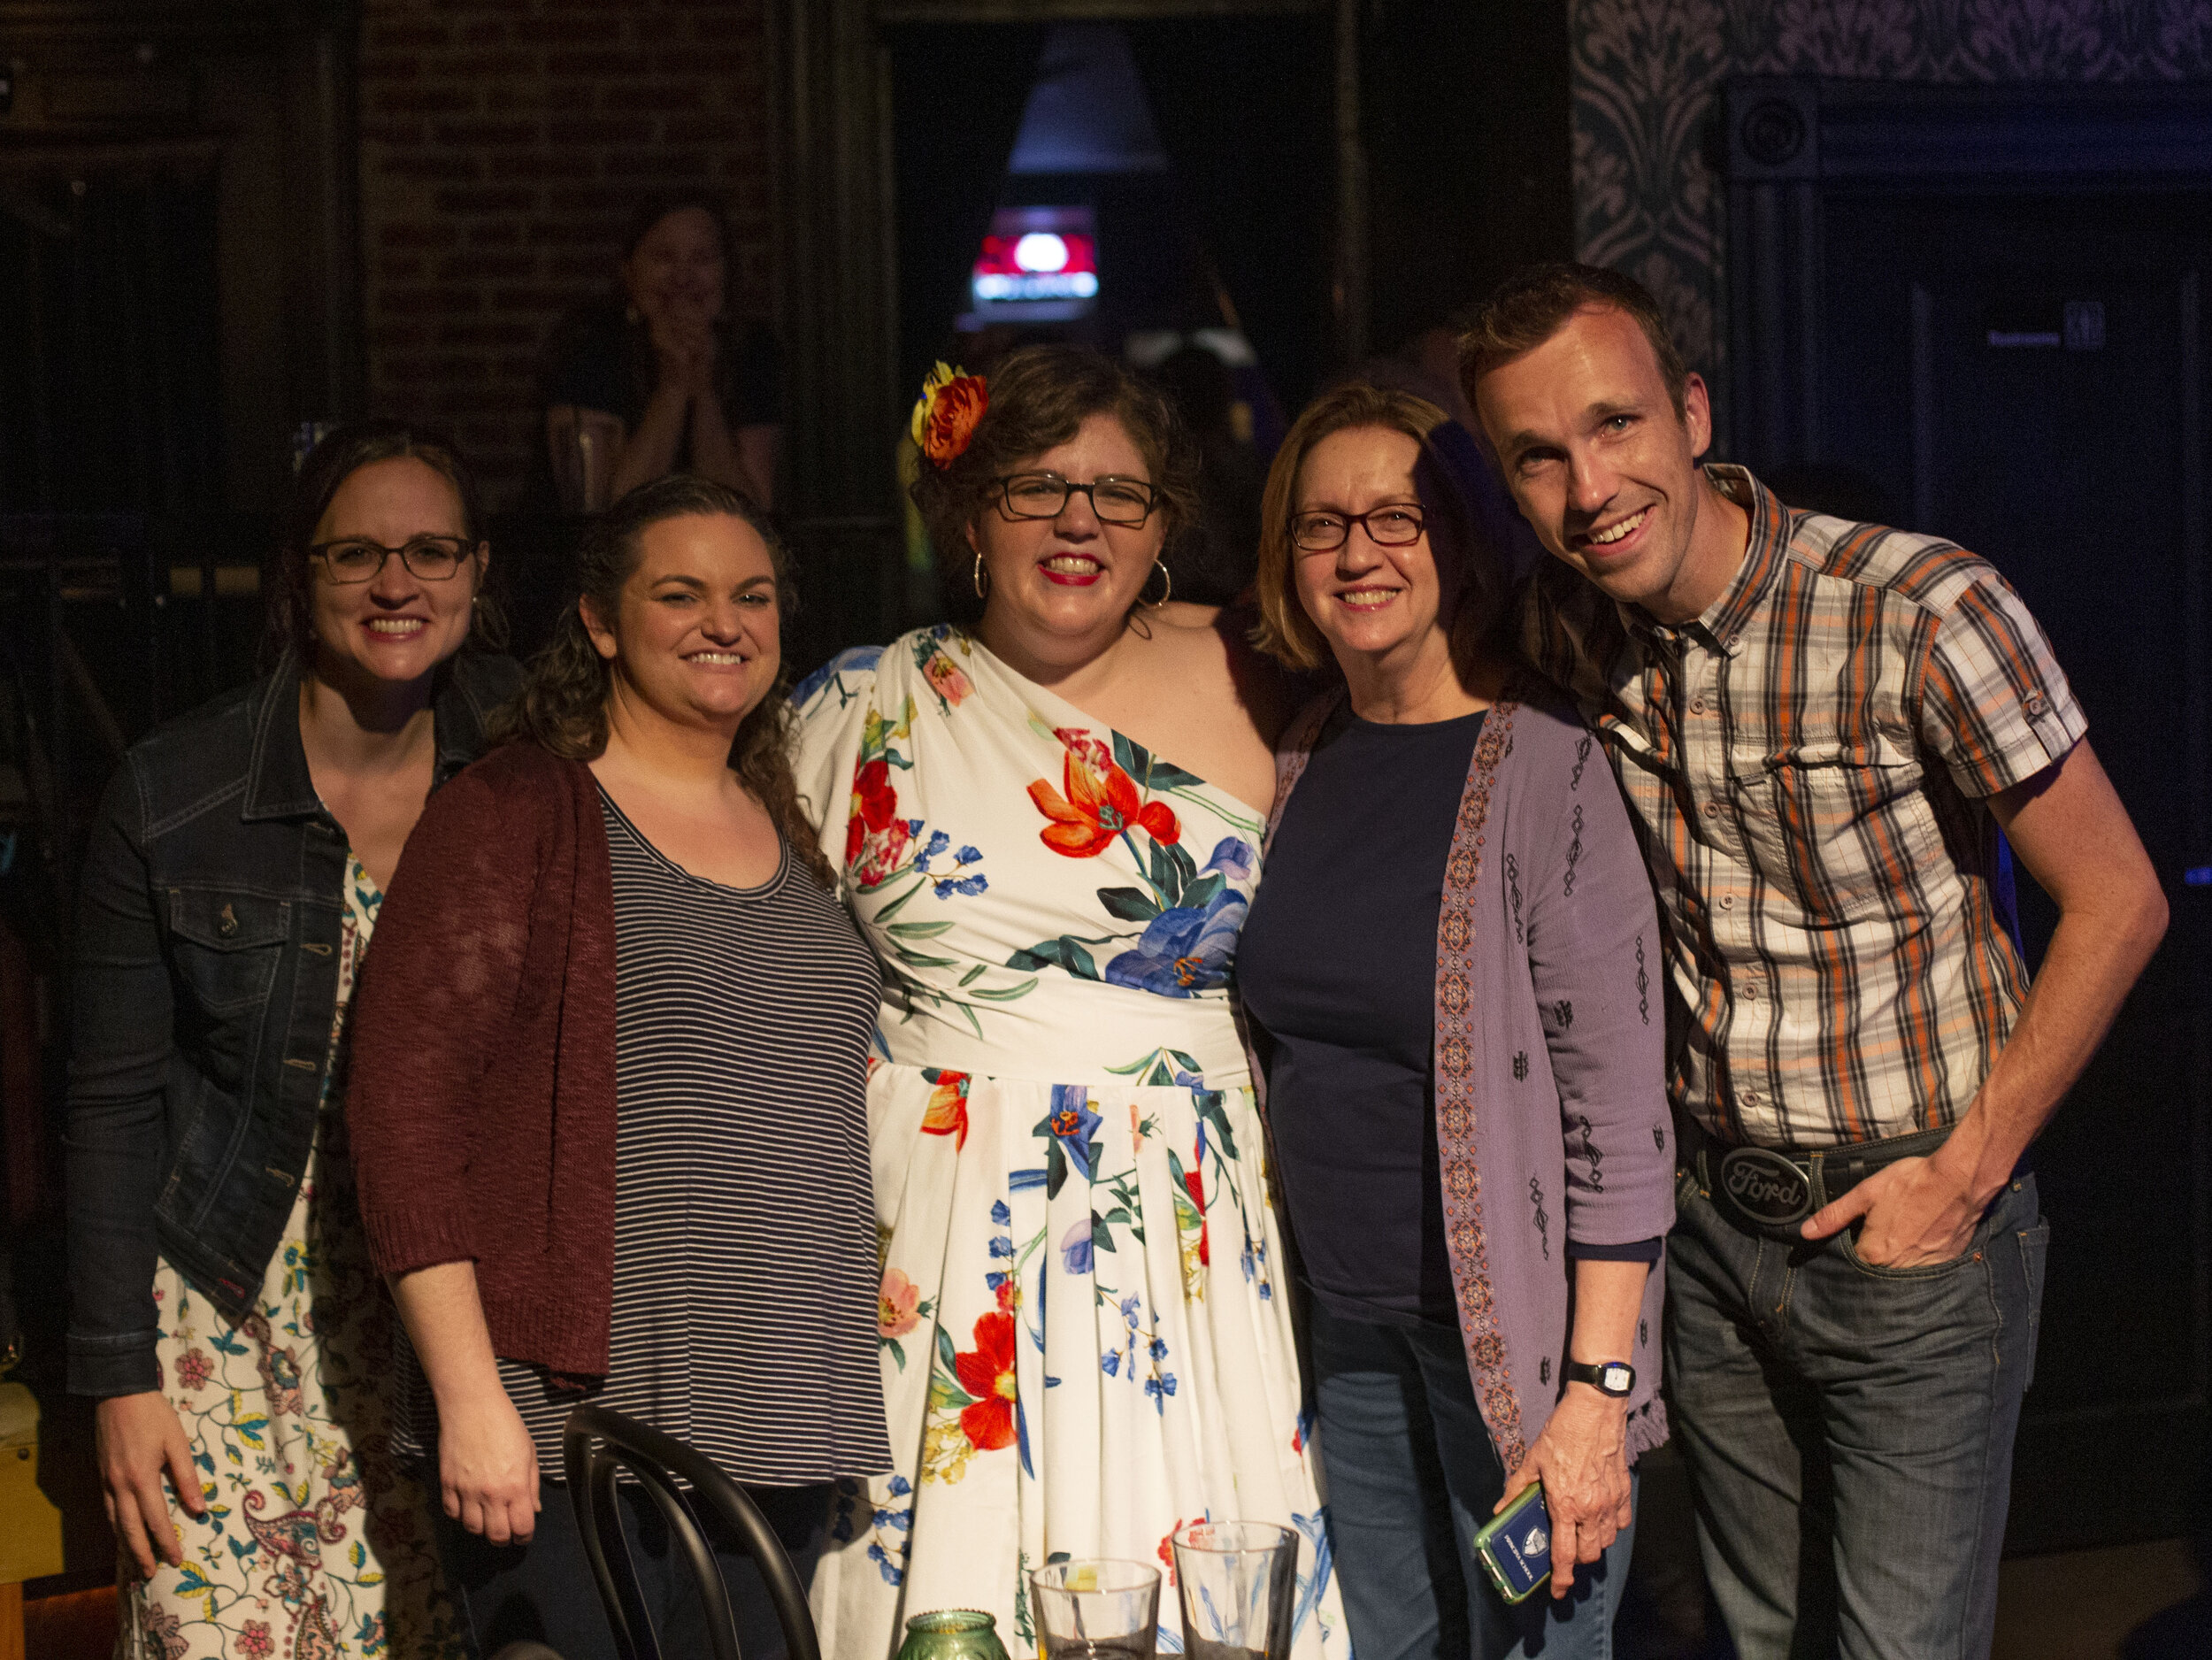  Lots of wonderful friends came out to see the show! &lt;3  PC:  August Oldelm  